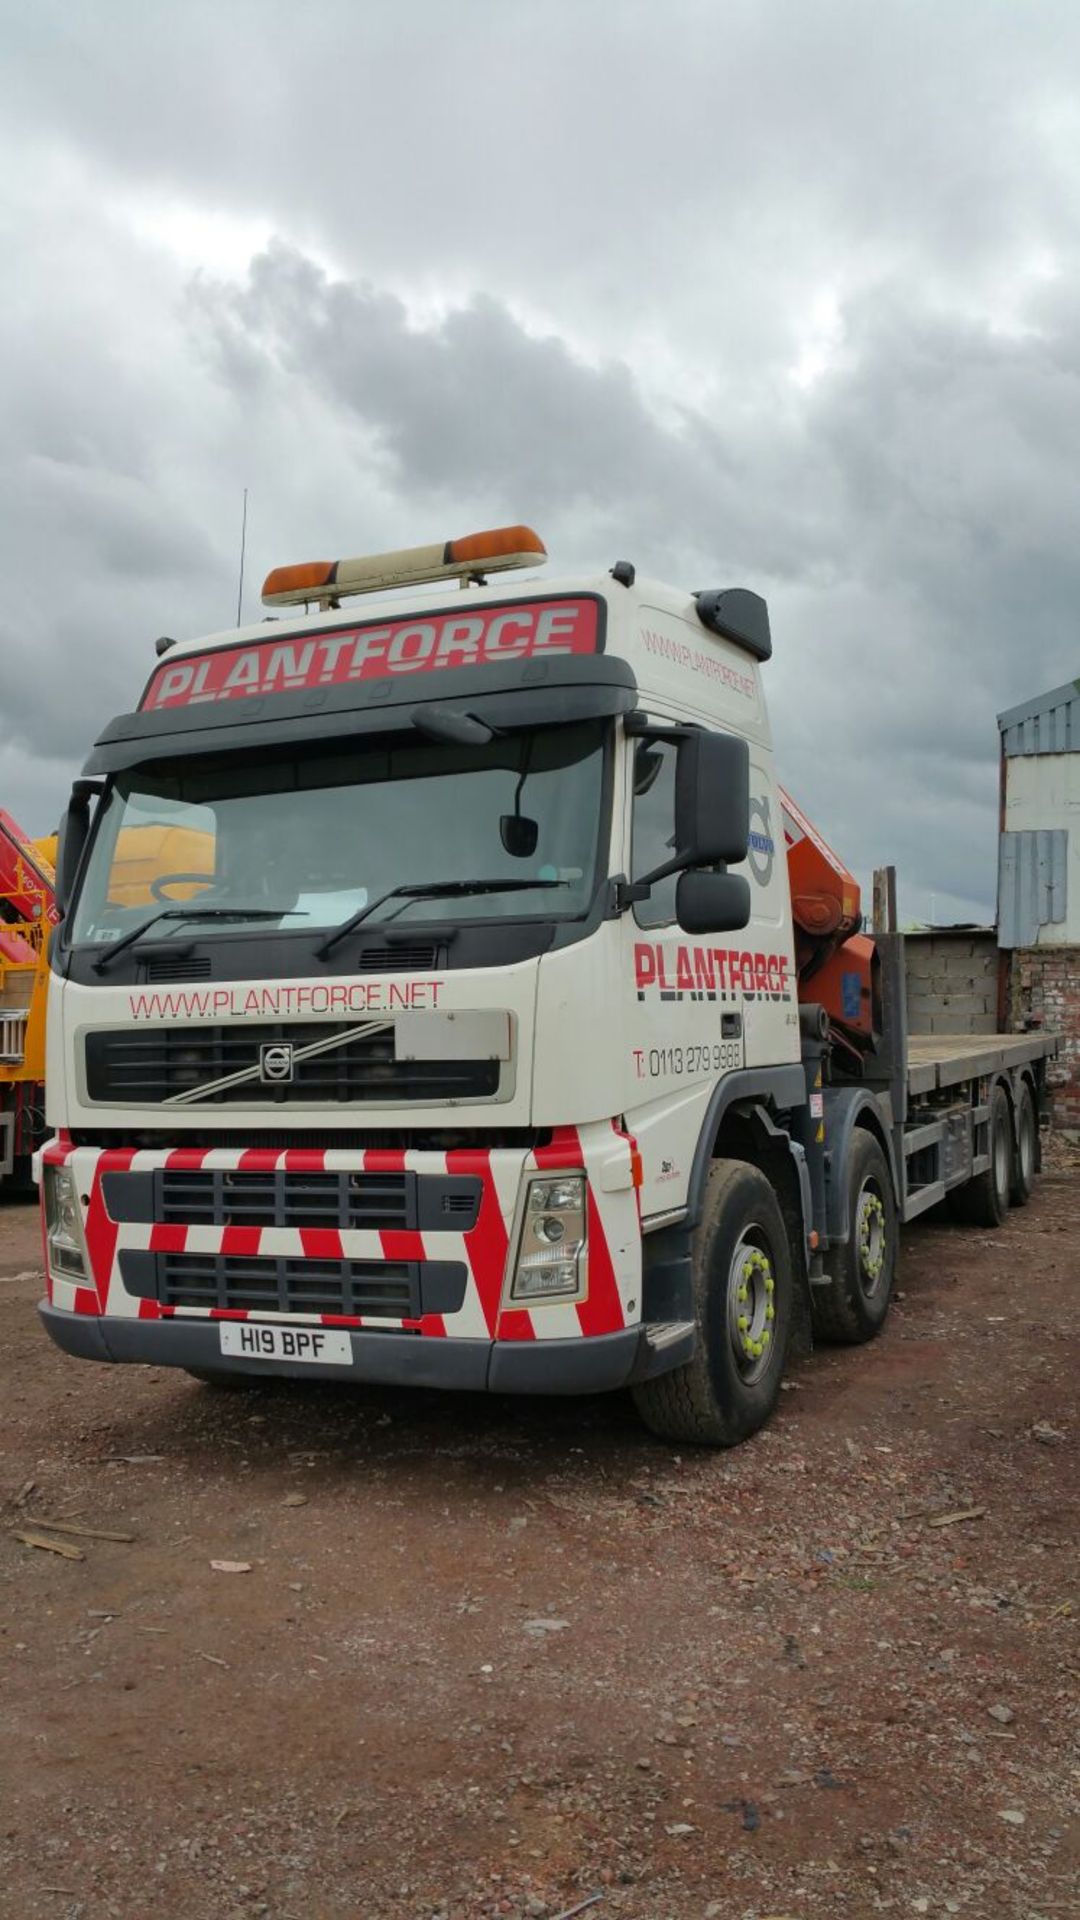 2007 Volvo 8x4 380 hp Flat bed fitted with Pesci 585/5 Crane - Image 6 of 8